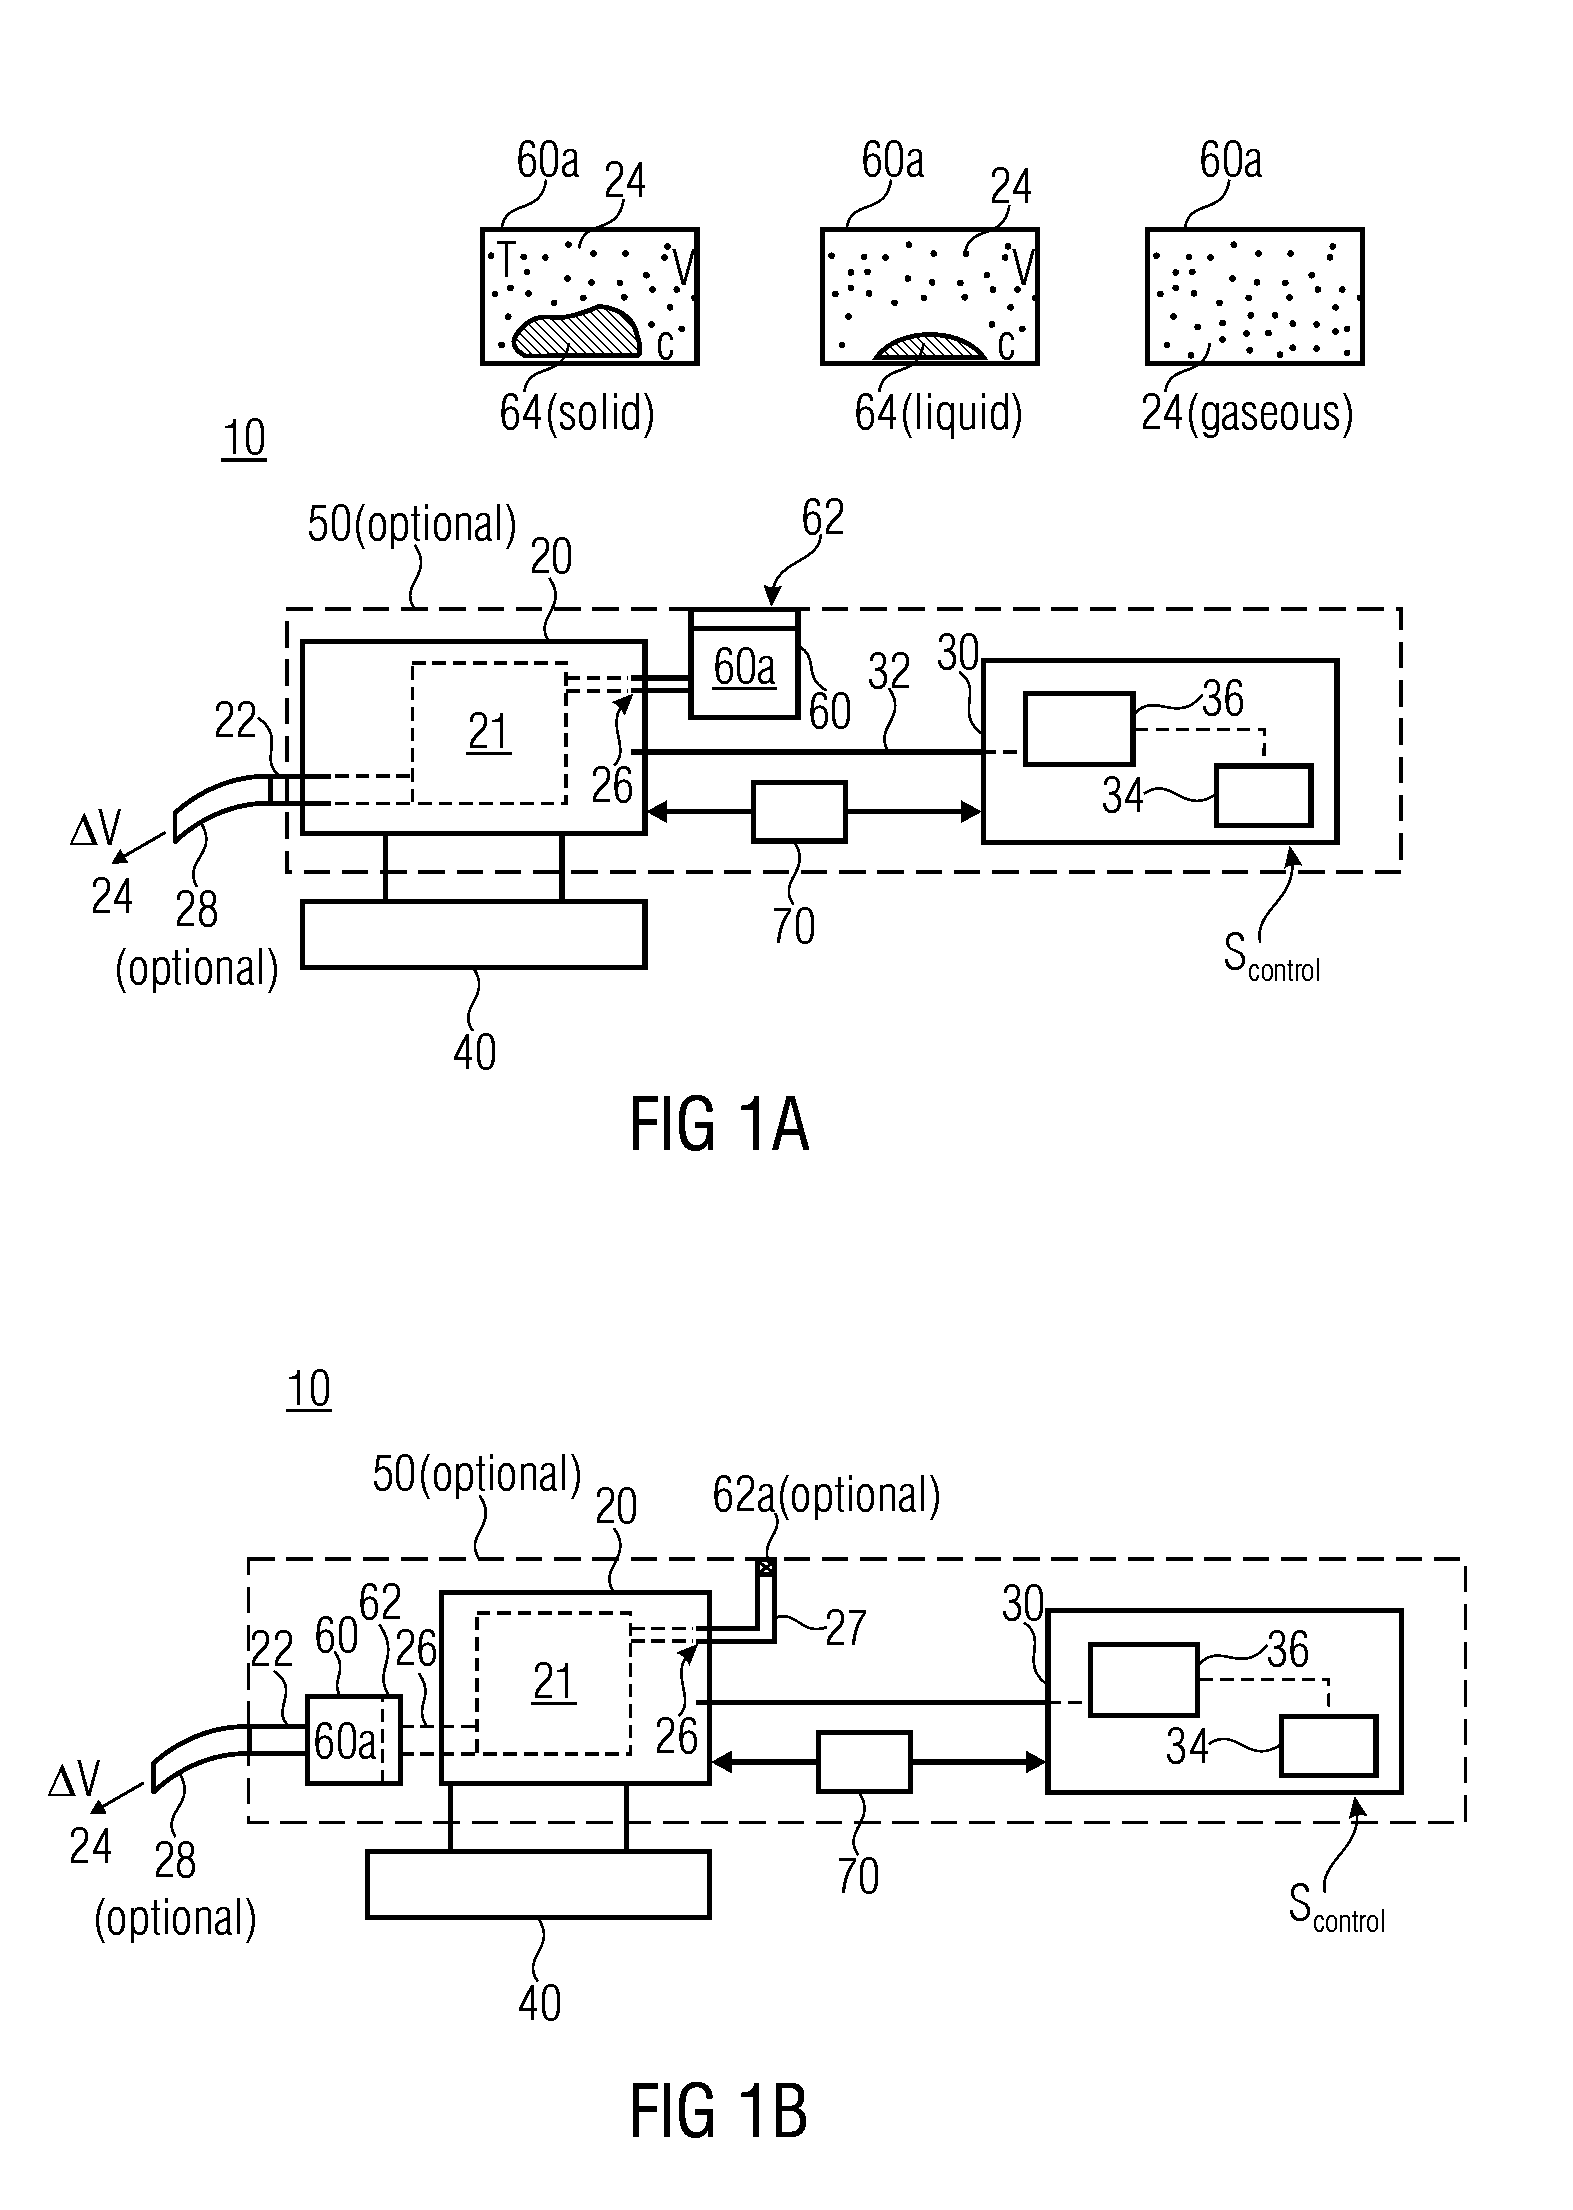 Controllable fluid sample dispenser and methods using the same